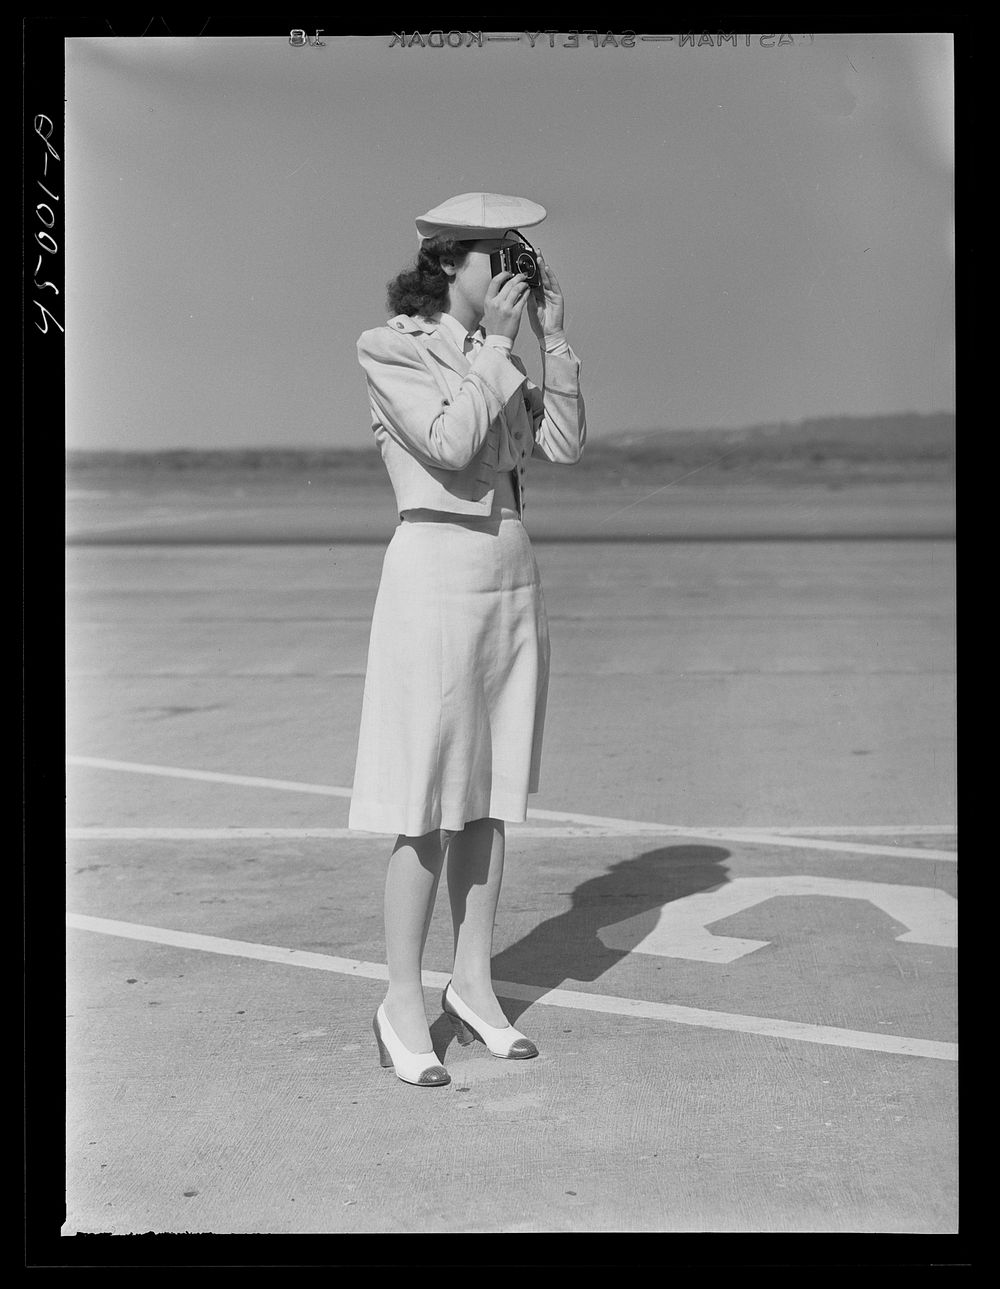 An airline hostess. Washington, D.C. municipal airport. Sourced from the Library of Congress.